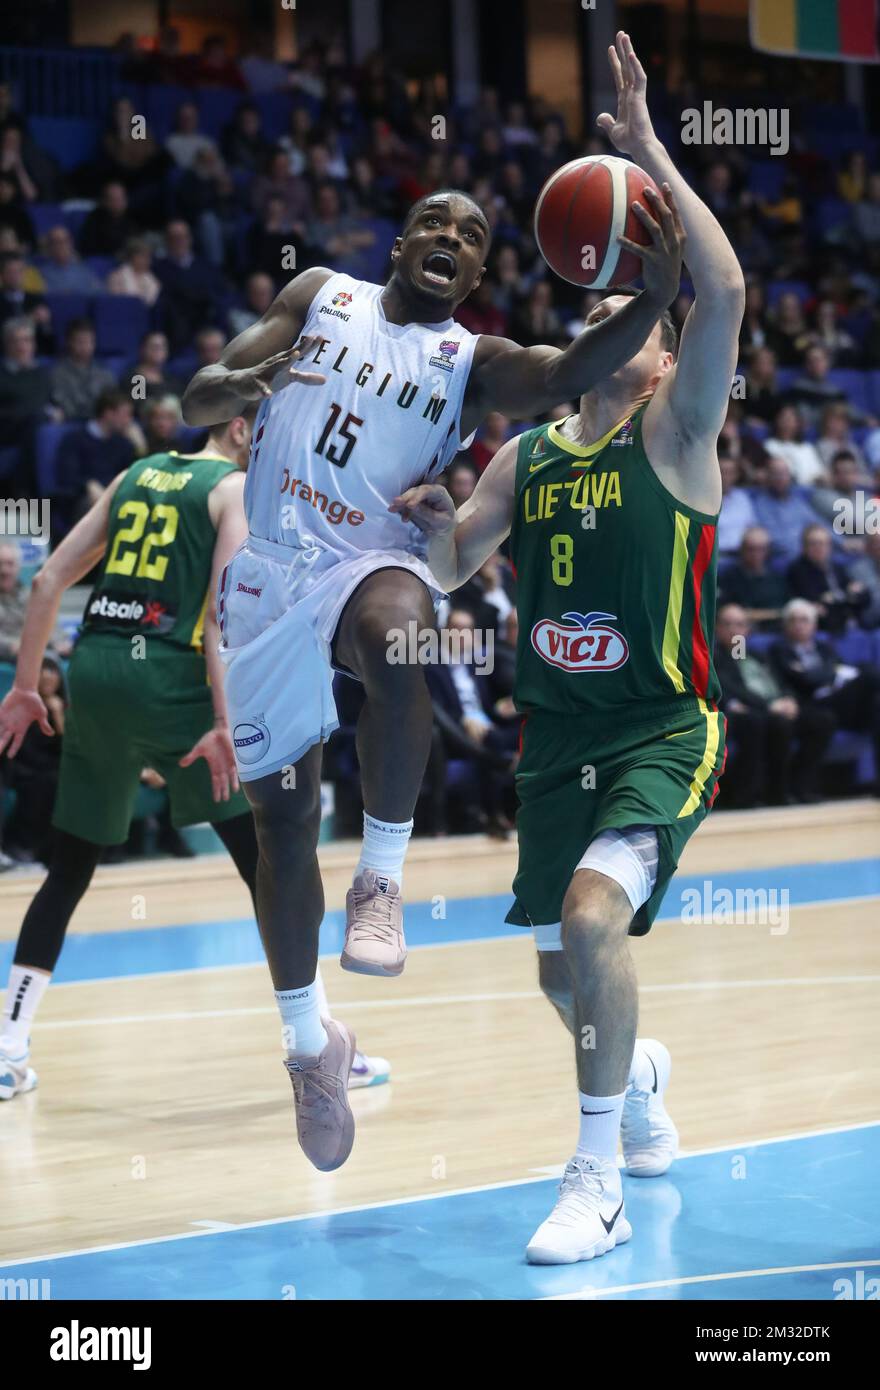 Belgium's Retin Obasohan and Lithuania's Jonas Maciulis fight for the ball during the match between the Belgian Lions and Lithuania, game one of six in group C of the qualifications for the 2021 European Championships, Friday 21 February 2020, at the Mons Arena in Jemappe. BELGA PHOTO VIRGINIE LEFOUR Stock Photo